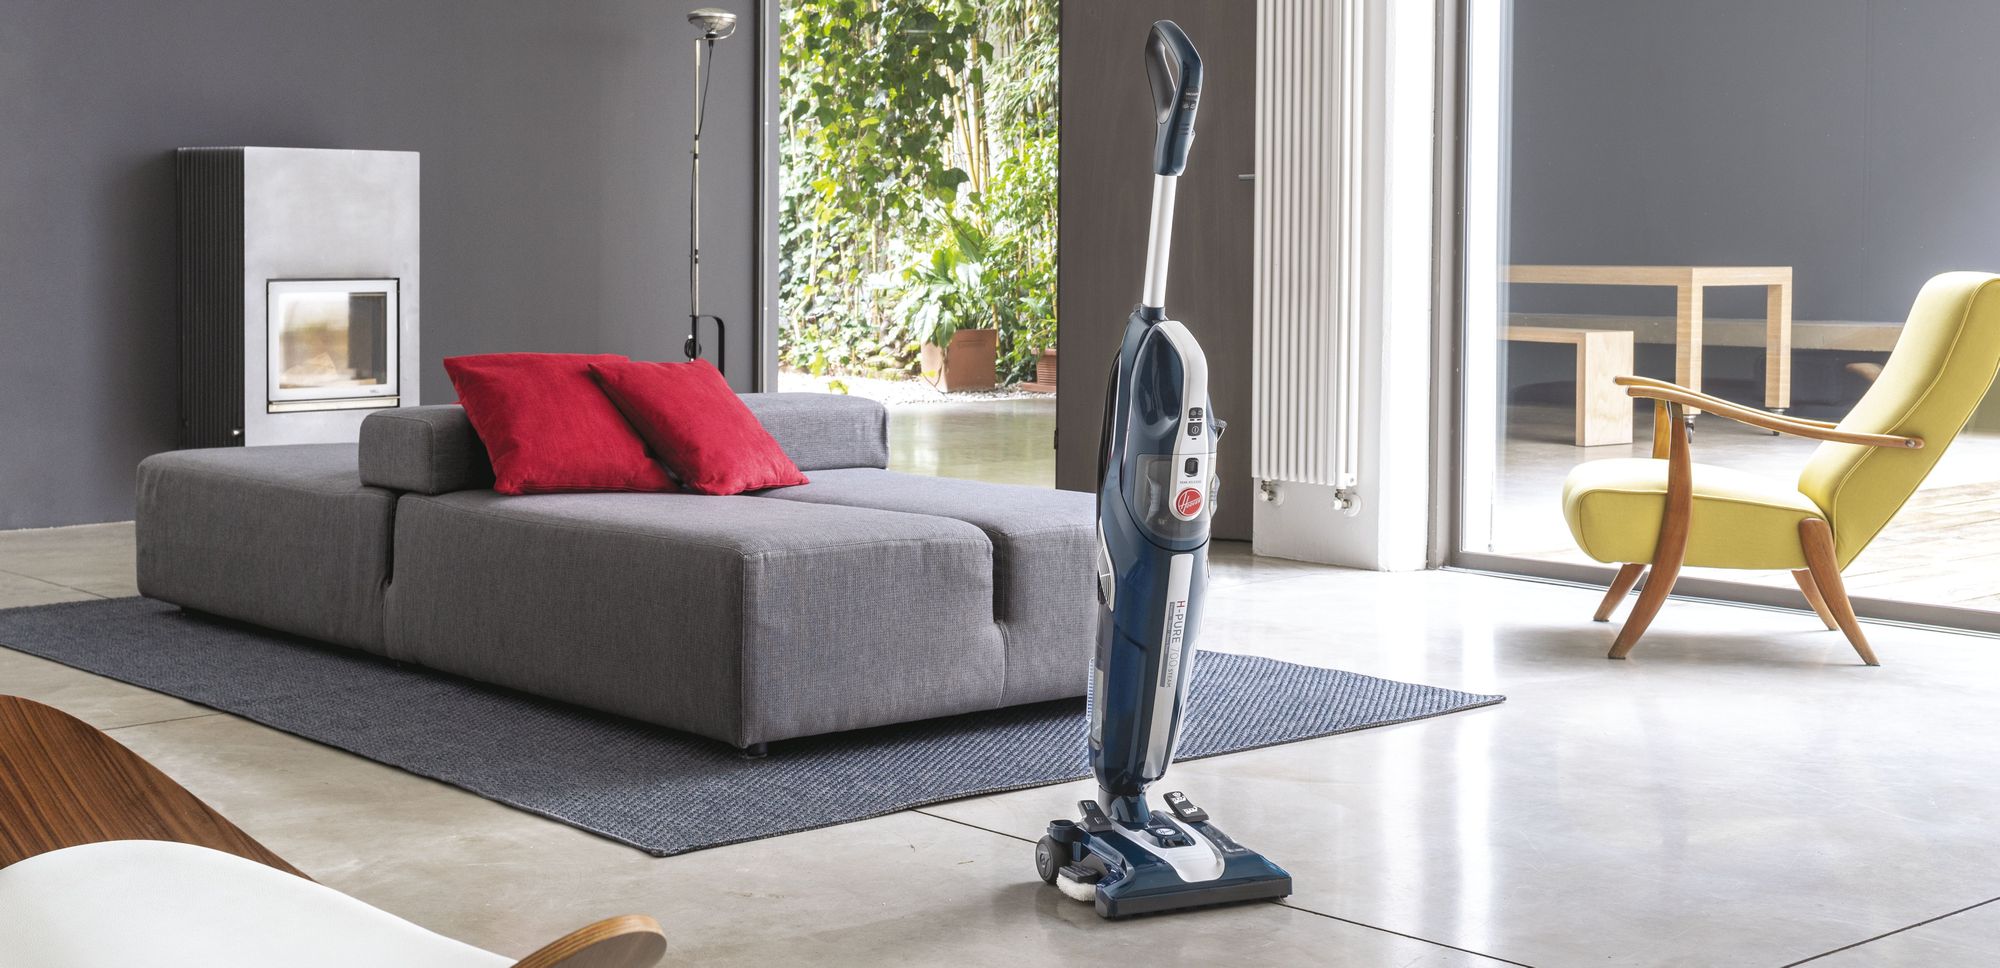 Hoover H-PURE 700 STEAM - Nowosciproduktowe.pl-1